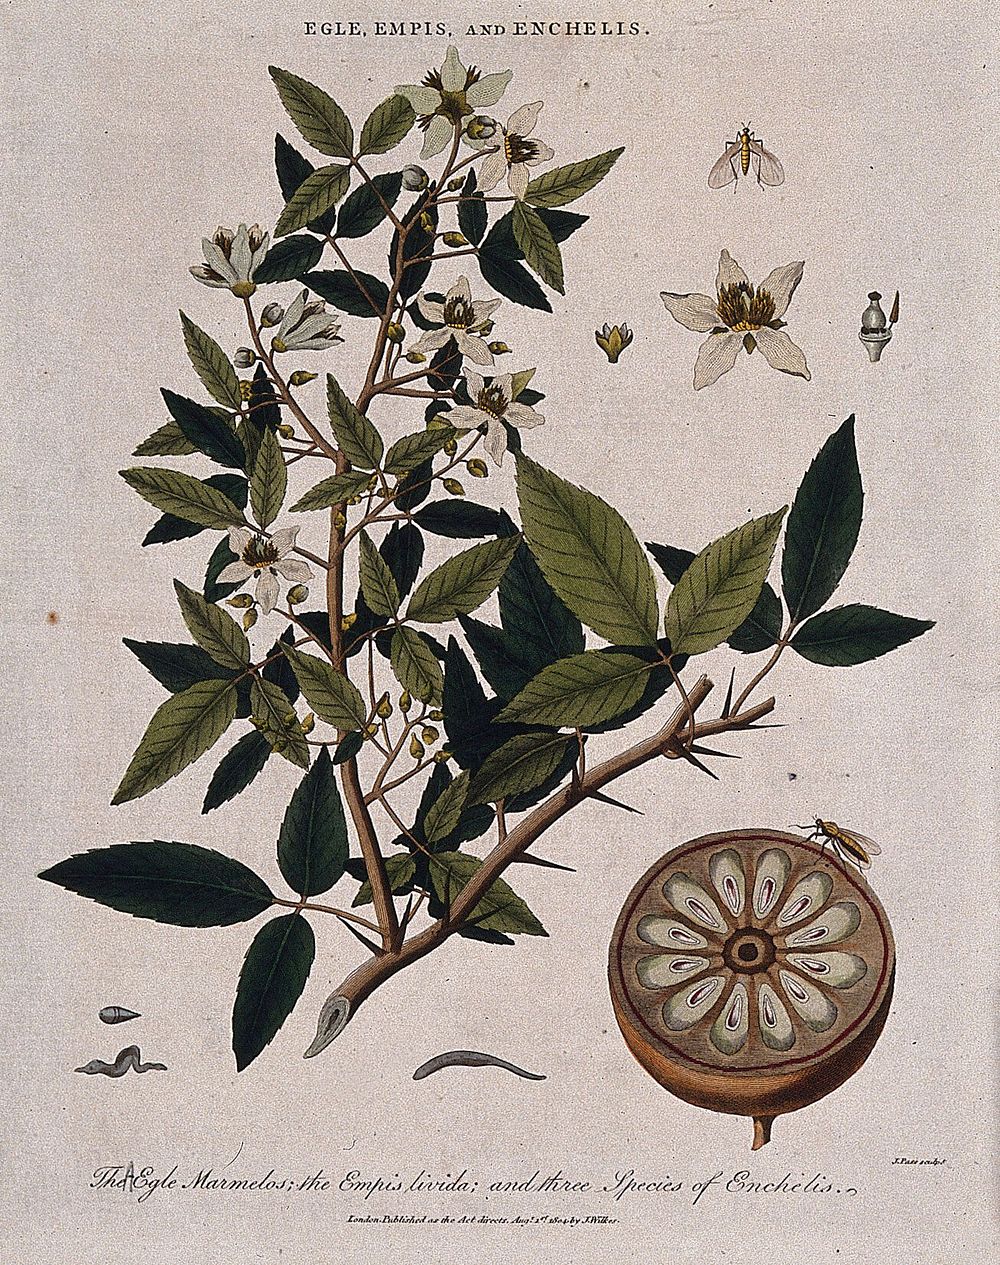 A bael tree (Aegle marmelos) with sectioned fruit, a dancefly (Empis livida) and three worms (Enchelis species). Coloured…